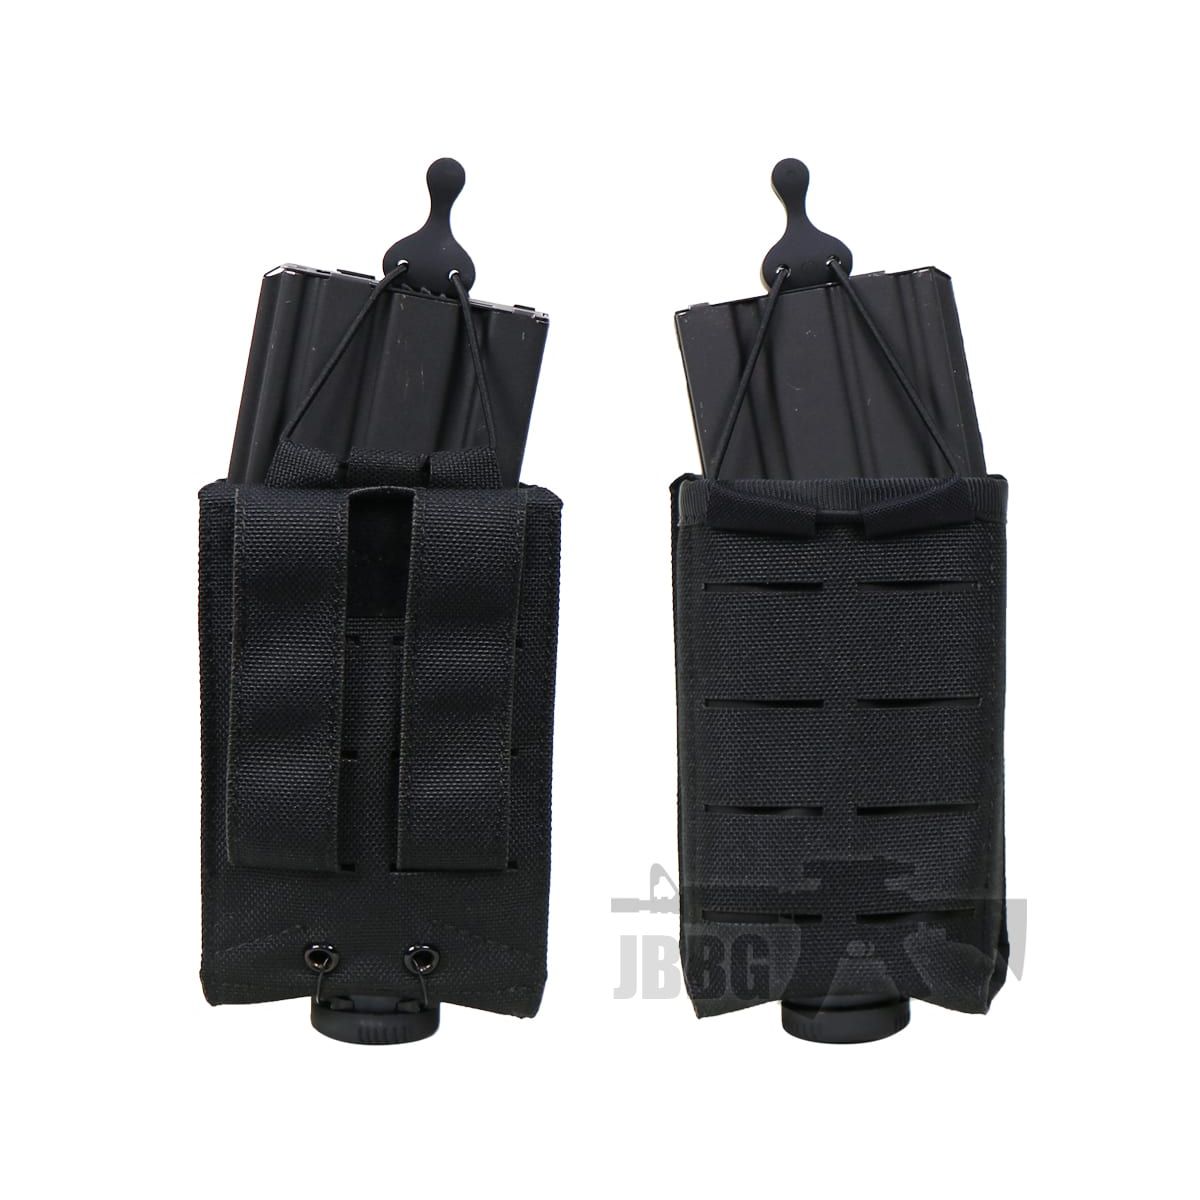 Adjustable Tactical Magazine Pouch for Molle System - Just BB Guns